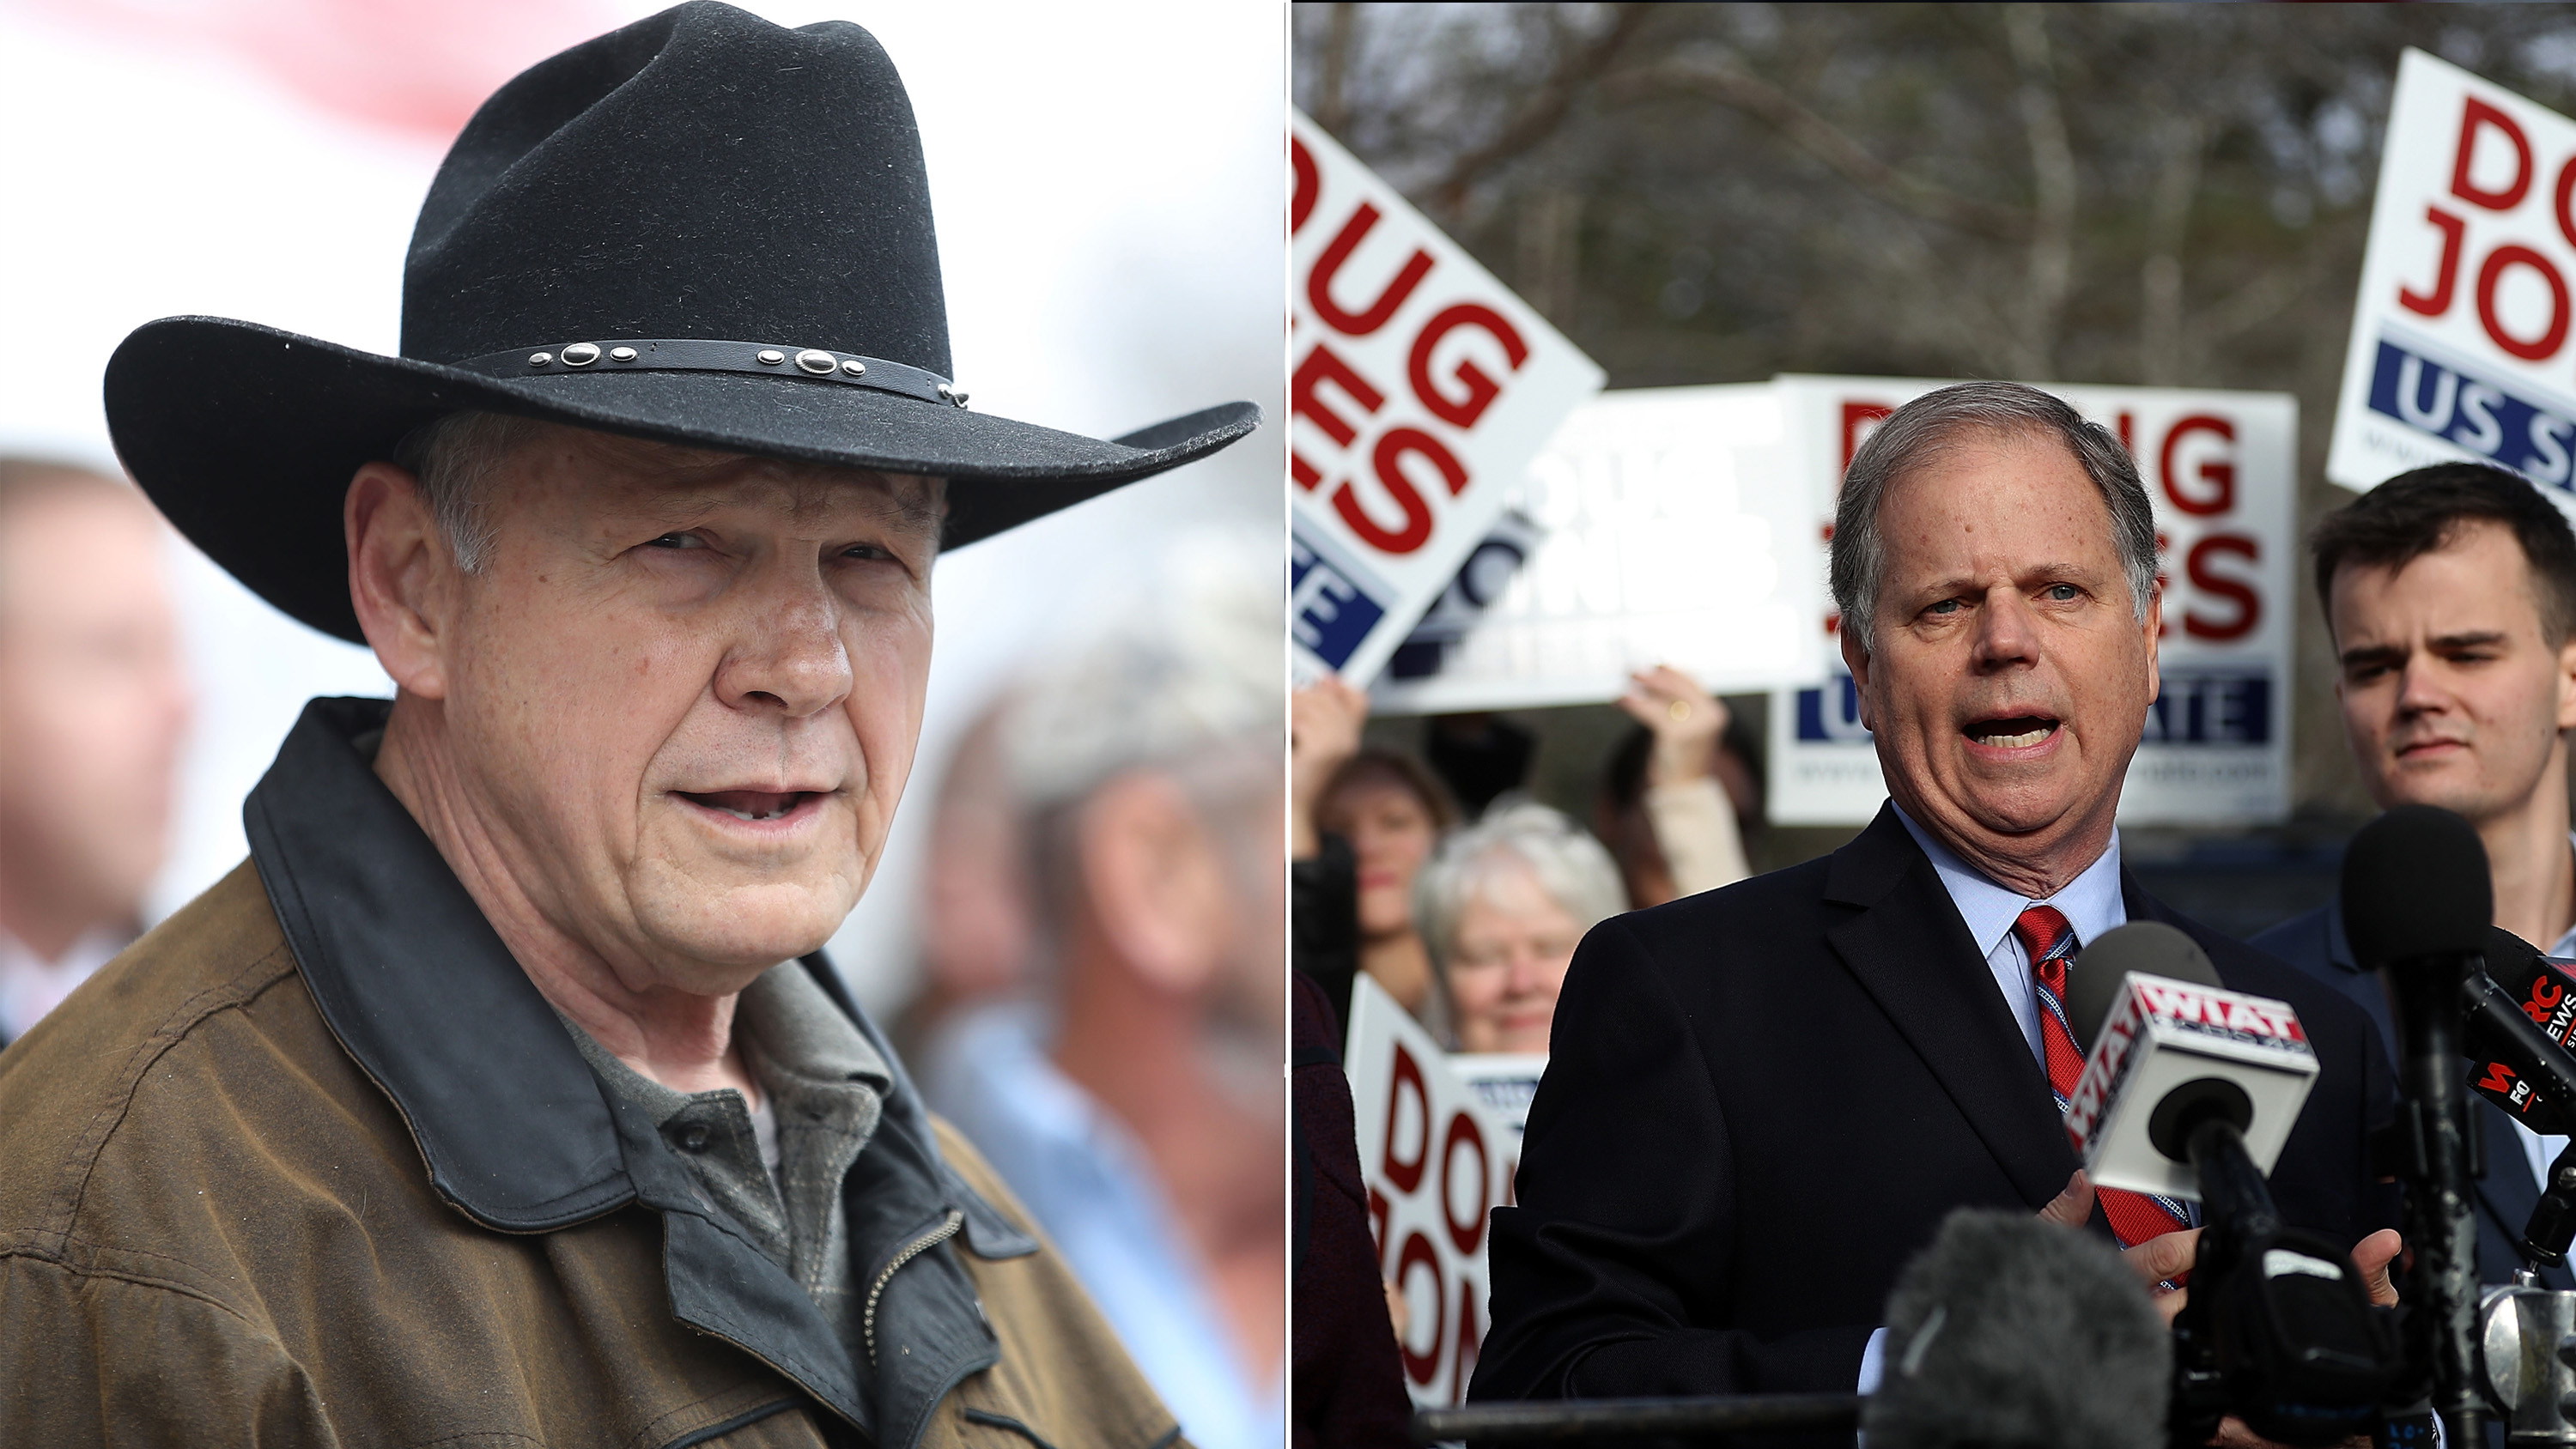 Alabama Special Election candidates Roy Moore (L) and Doug Jones (R) face off for Attorney General Jeff Sessions' vacant Senate seat. (Joe Raedle—Getty Images; Justin Sullivan—Getty Images)